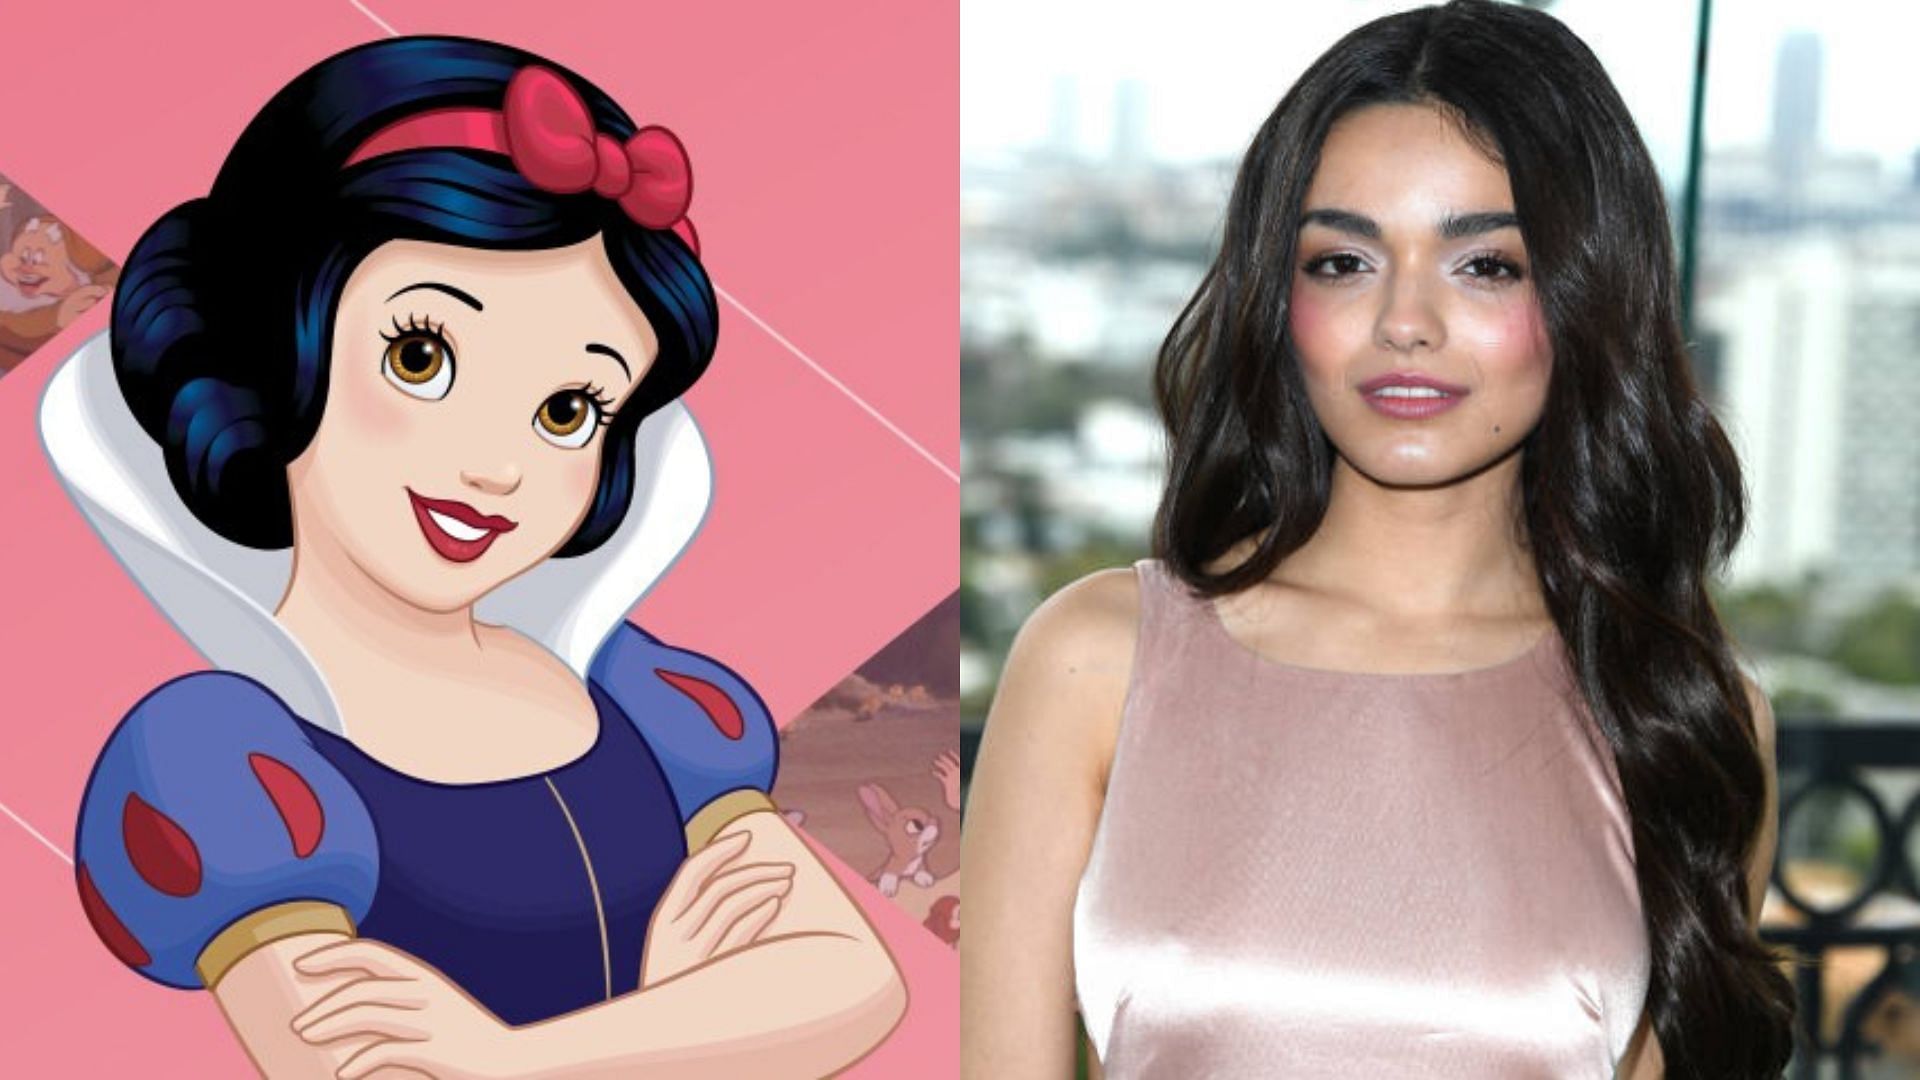 Who Is Playing Snow White In The Live-Action Movie? Explained